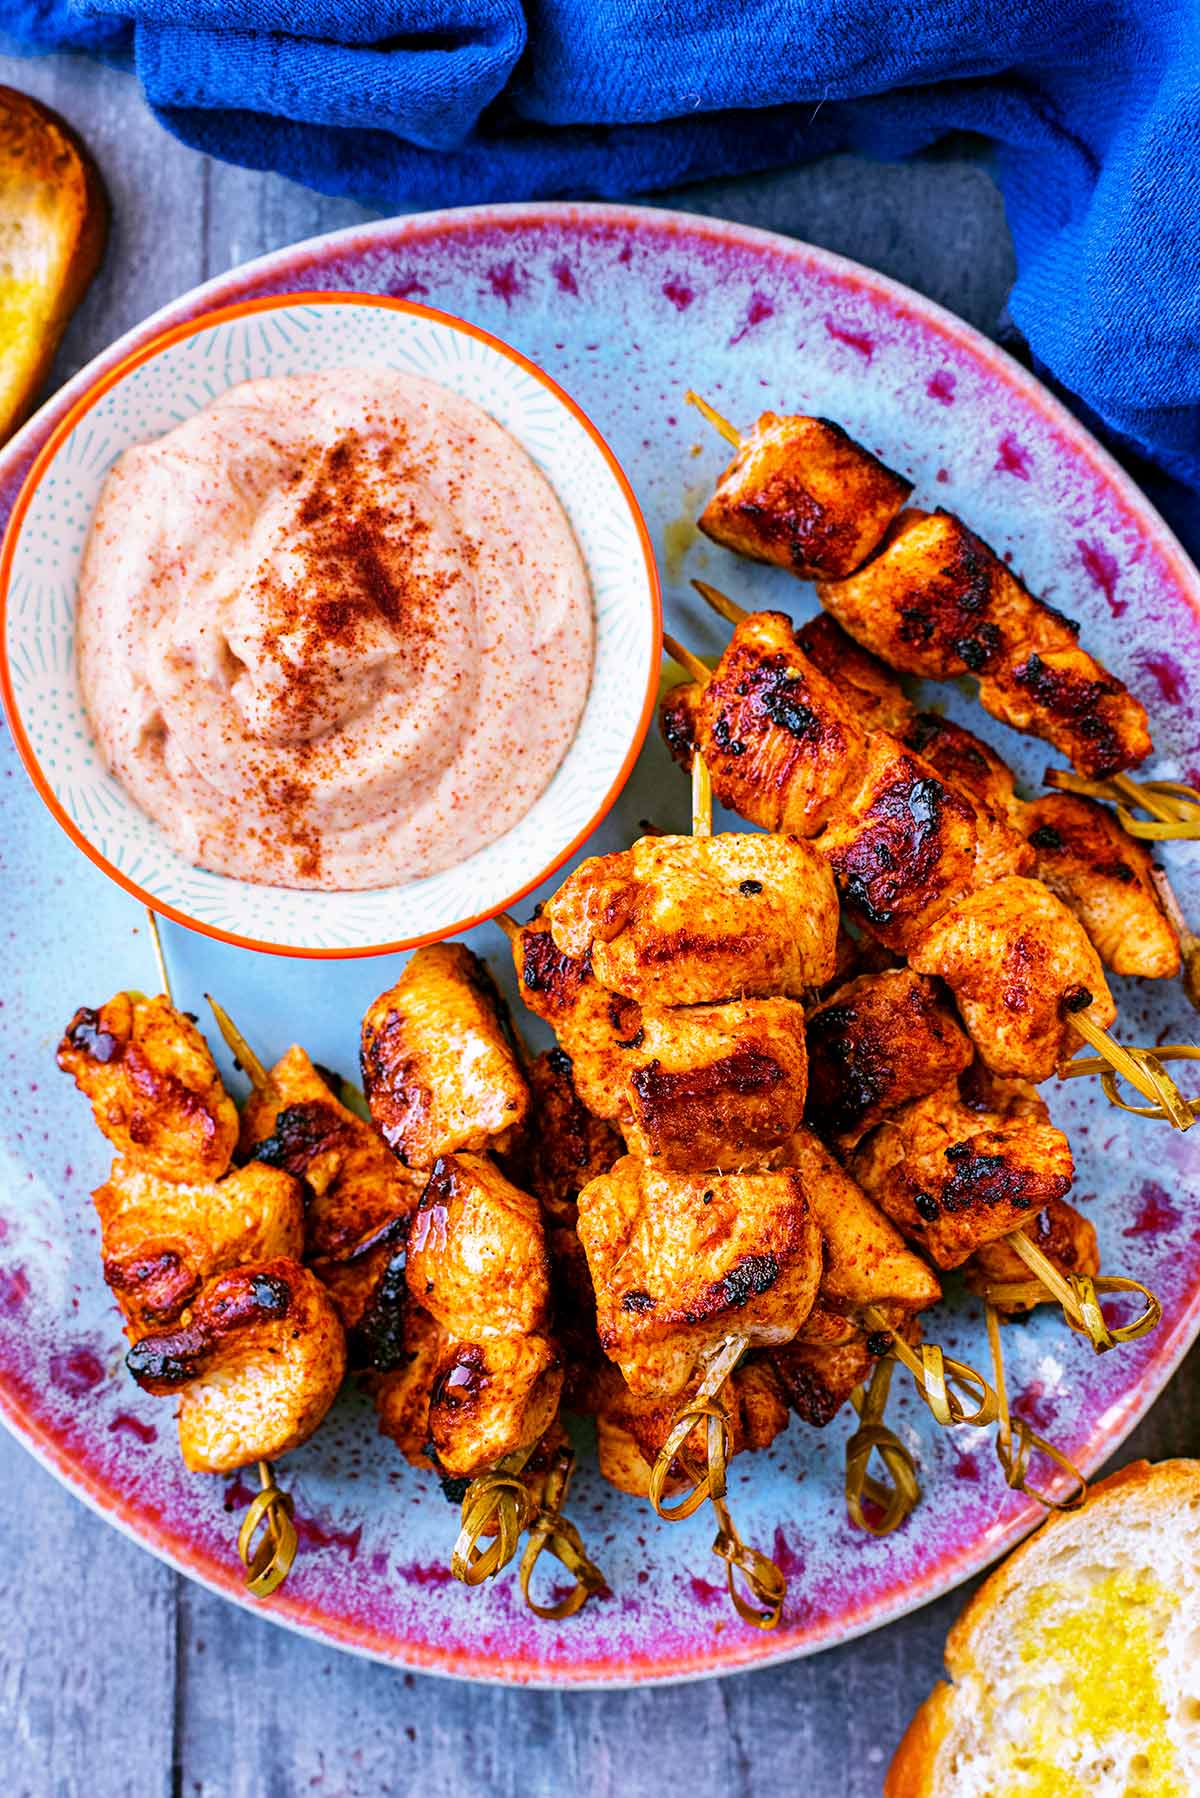 A plate of seasoned chicken skewers with a pot of dip.